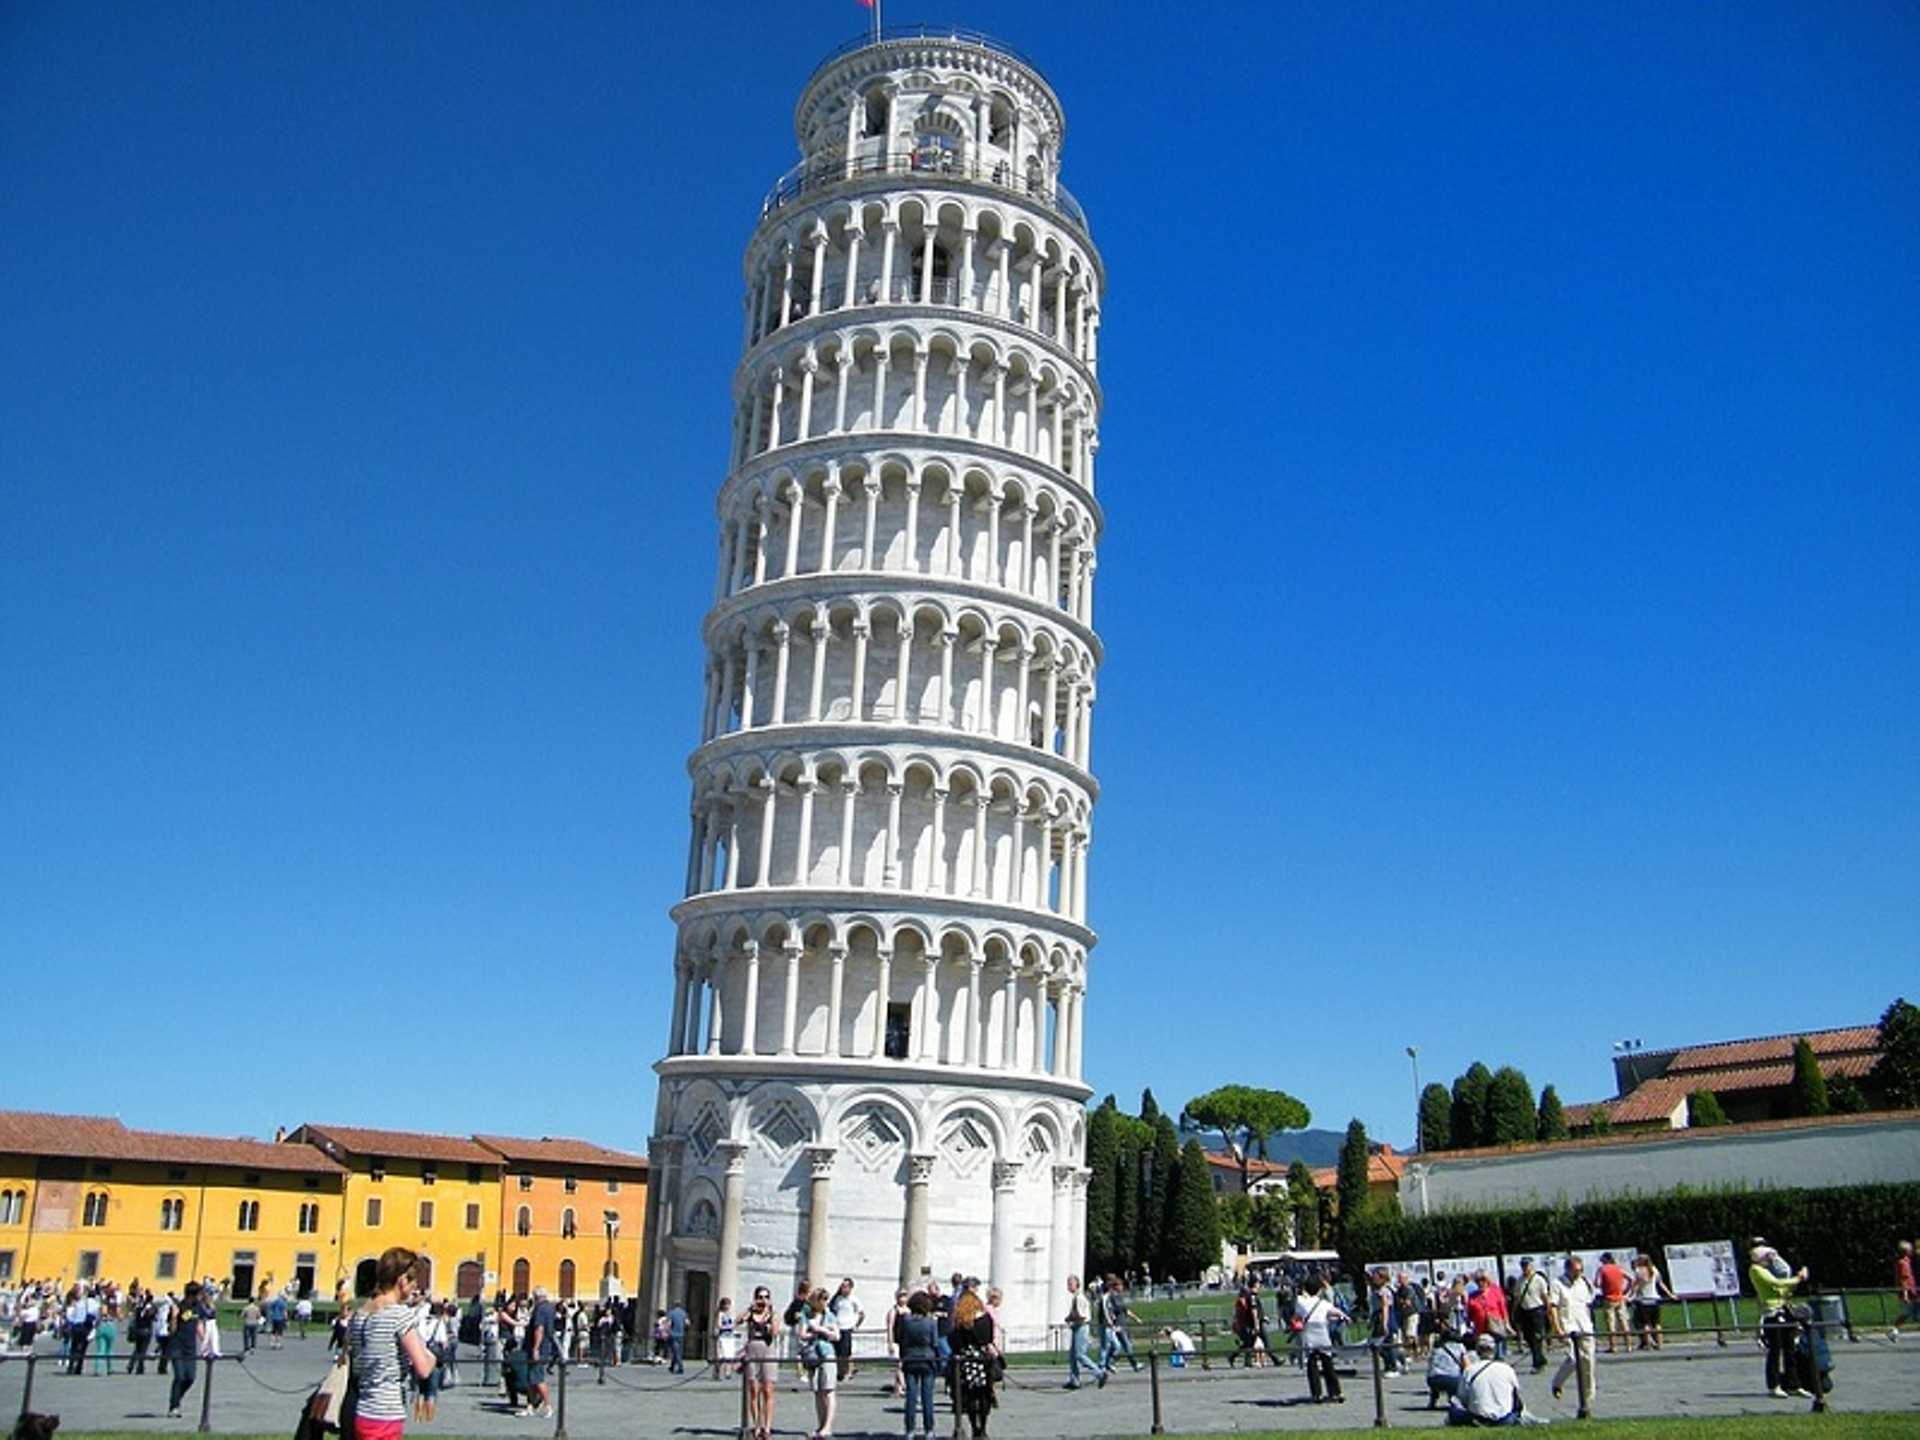 Excursion to Pisa with Leaning Tower access